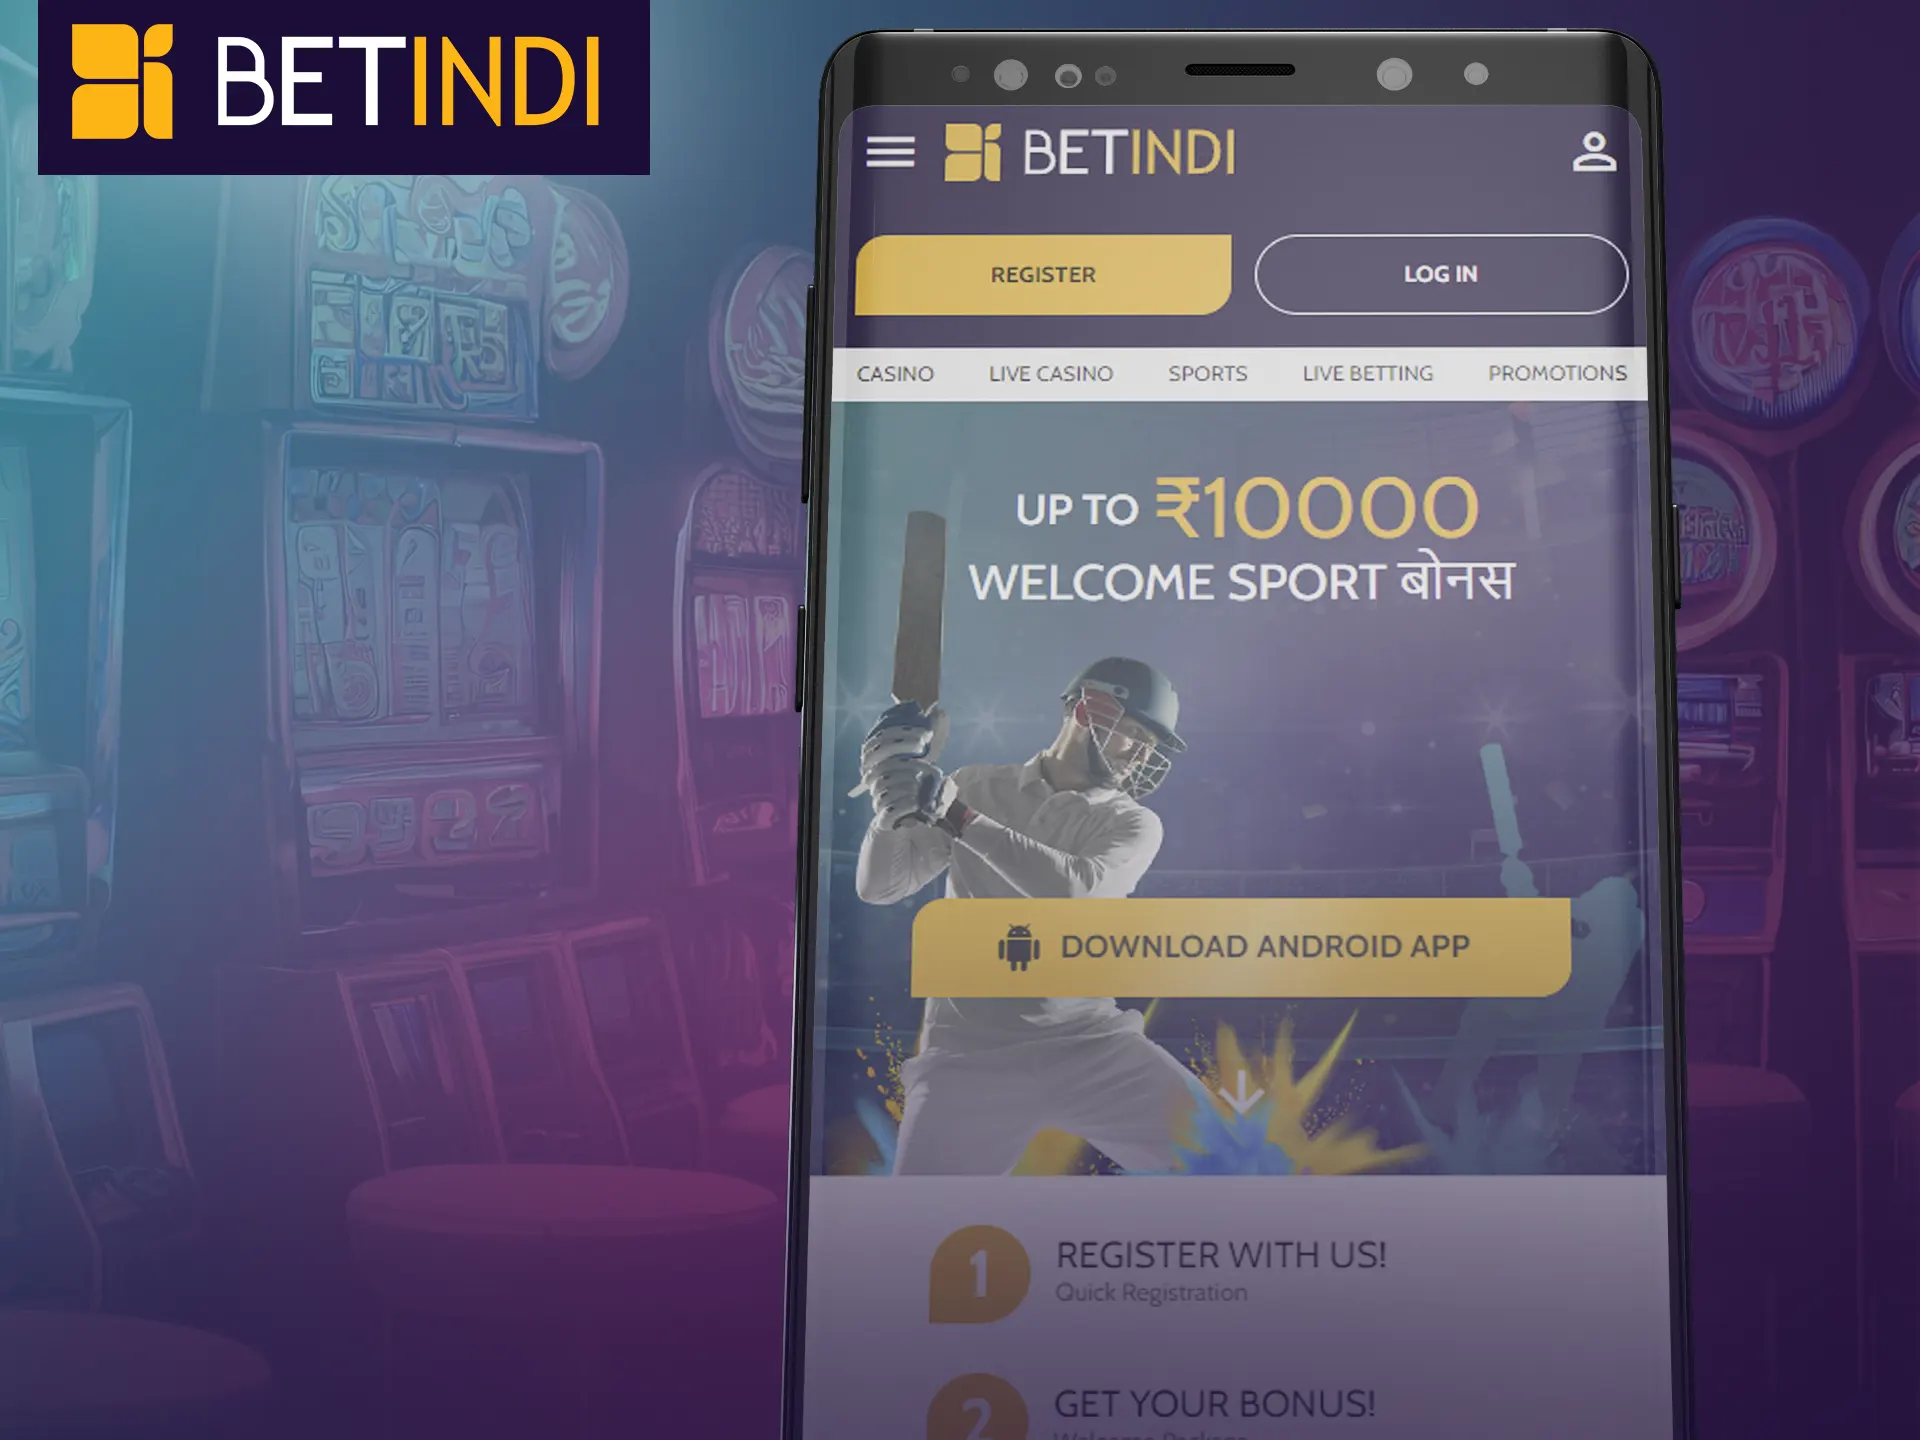 Access Betindi quickly via mobile website.